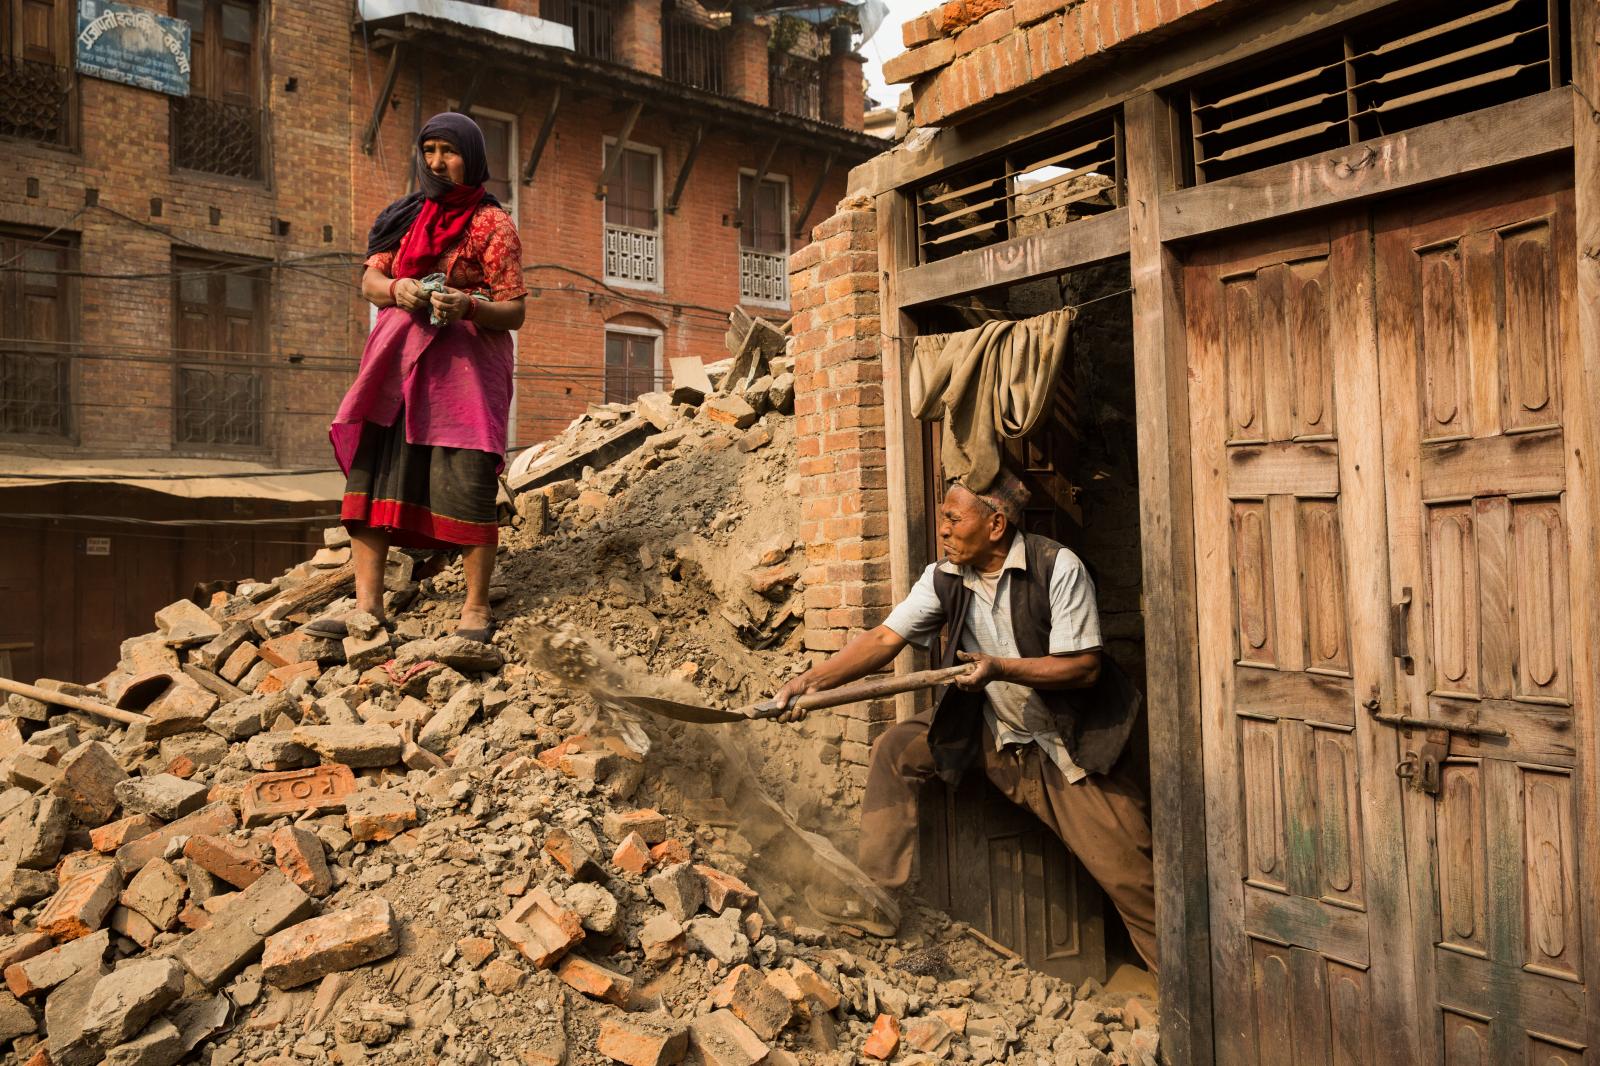 Nepal: A Shattered Country - 